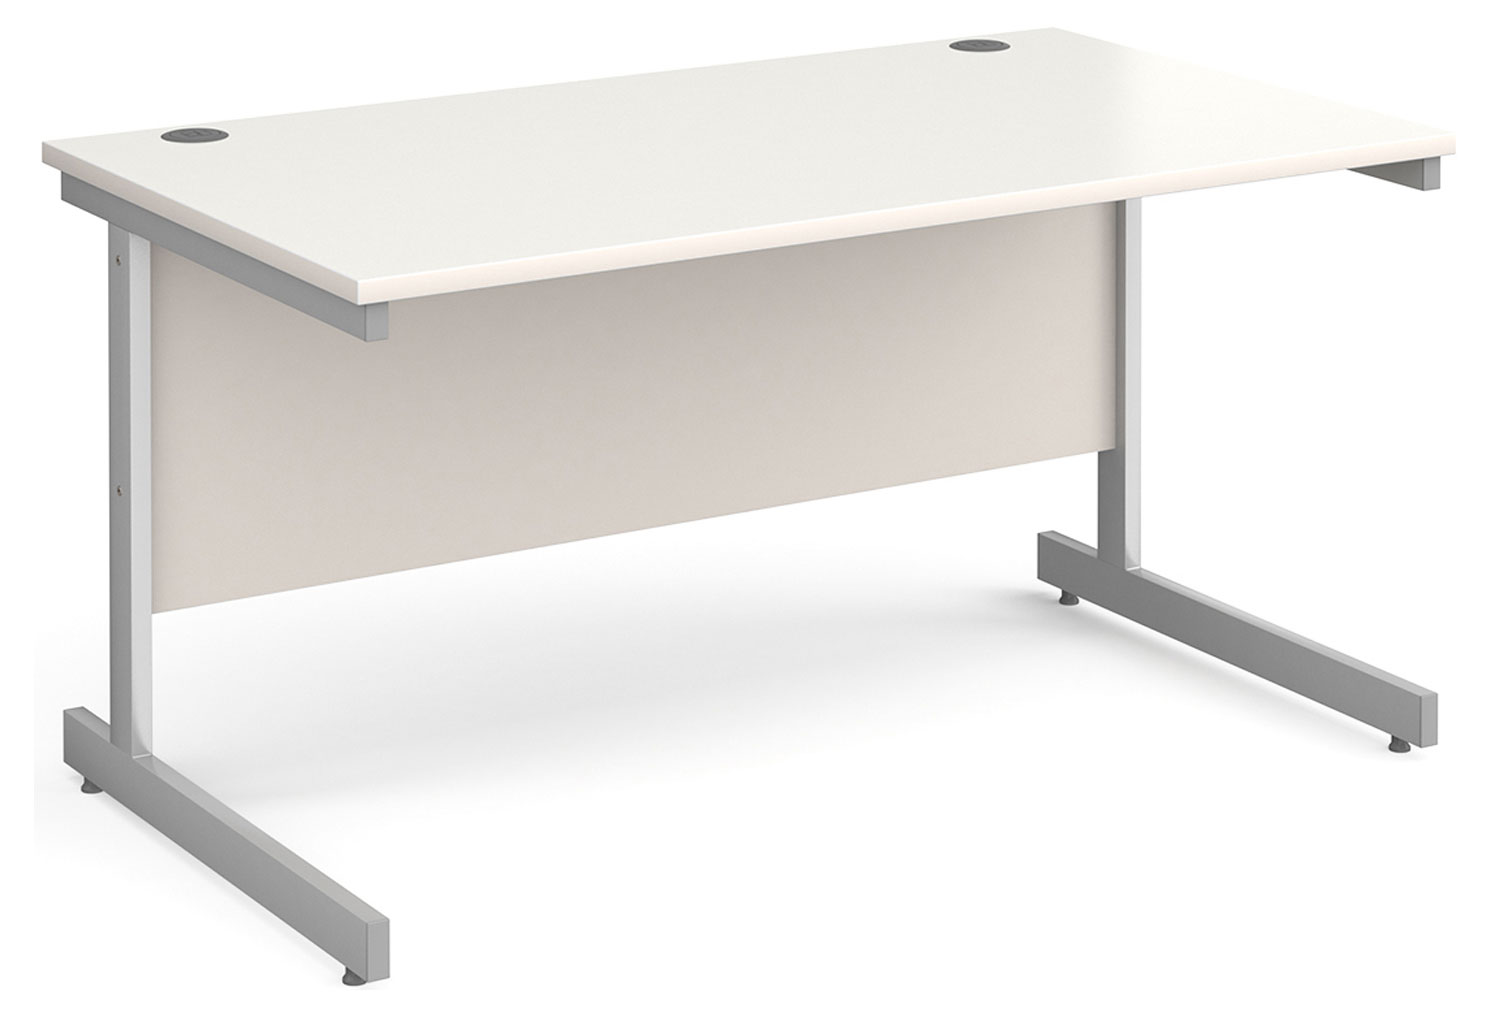 Thrifty Next-Day Rectangular Office Desk White, 140wx80dx73h (cm), Express Delivery